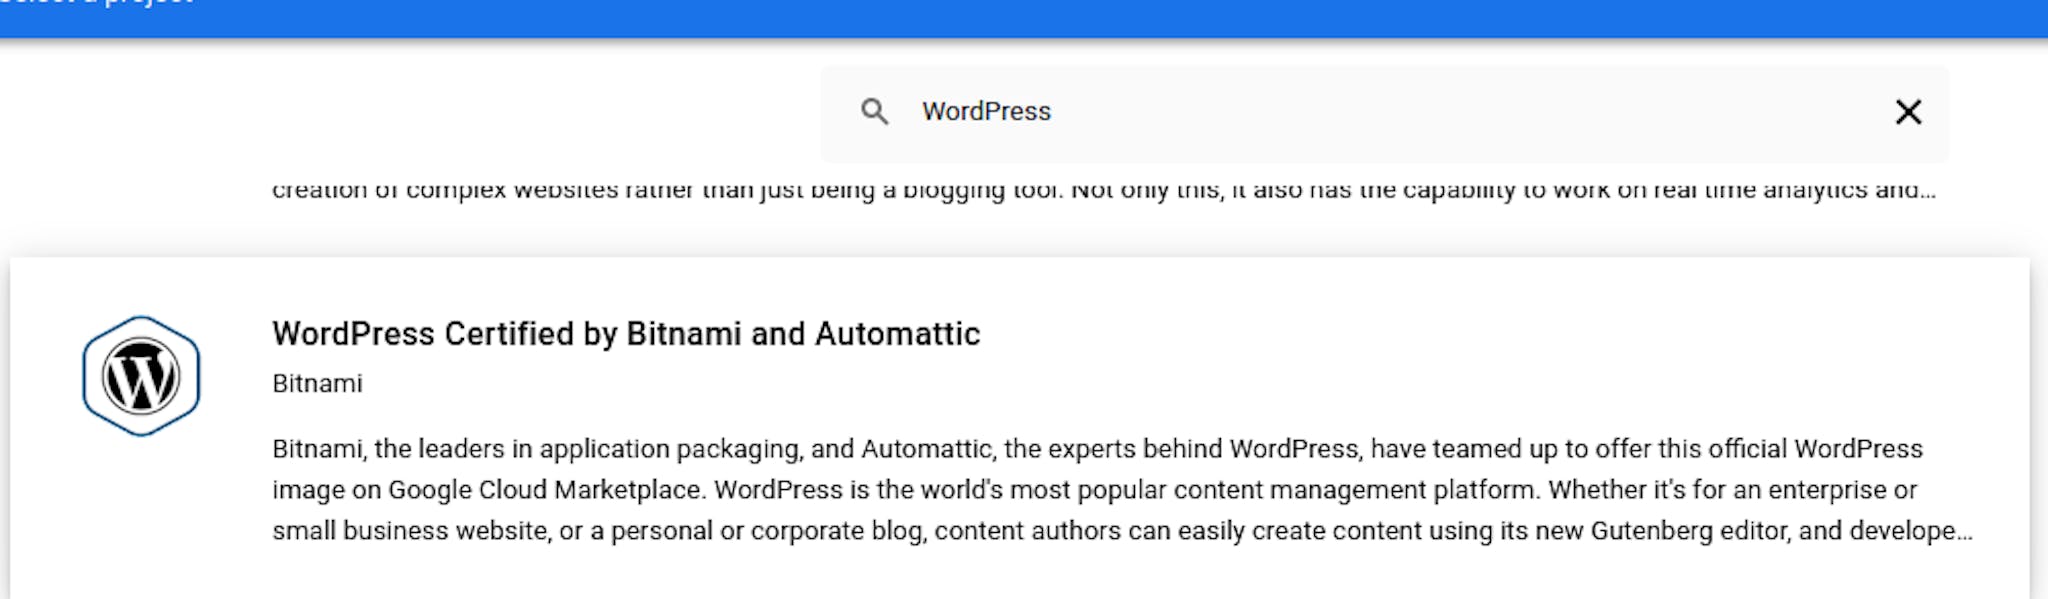 Bitnami and Automattic's solution for WordPress